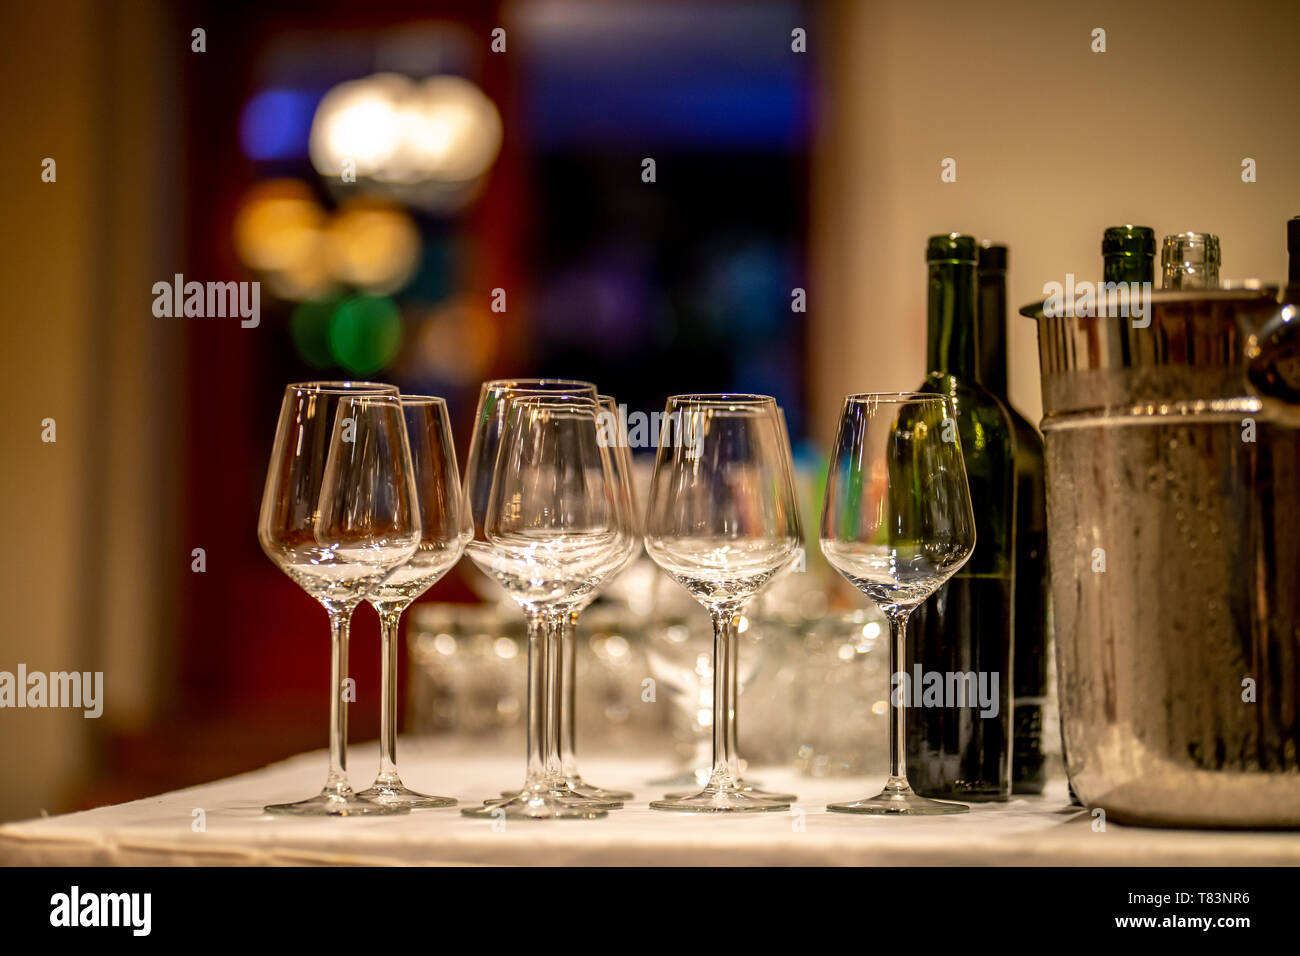 Empty glasses, wine bottles and bucket with ice on table in restaurant. Ice bucket, wine glasses and bottles arranged on the table for wedding recepti Stock Photo